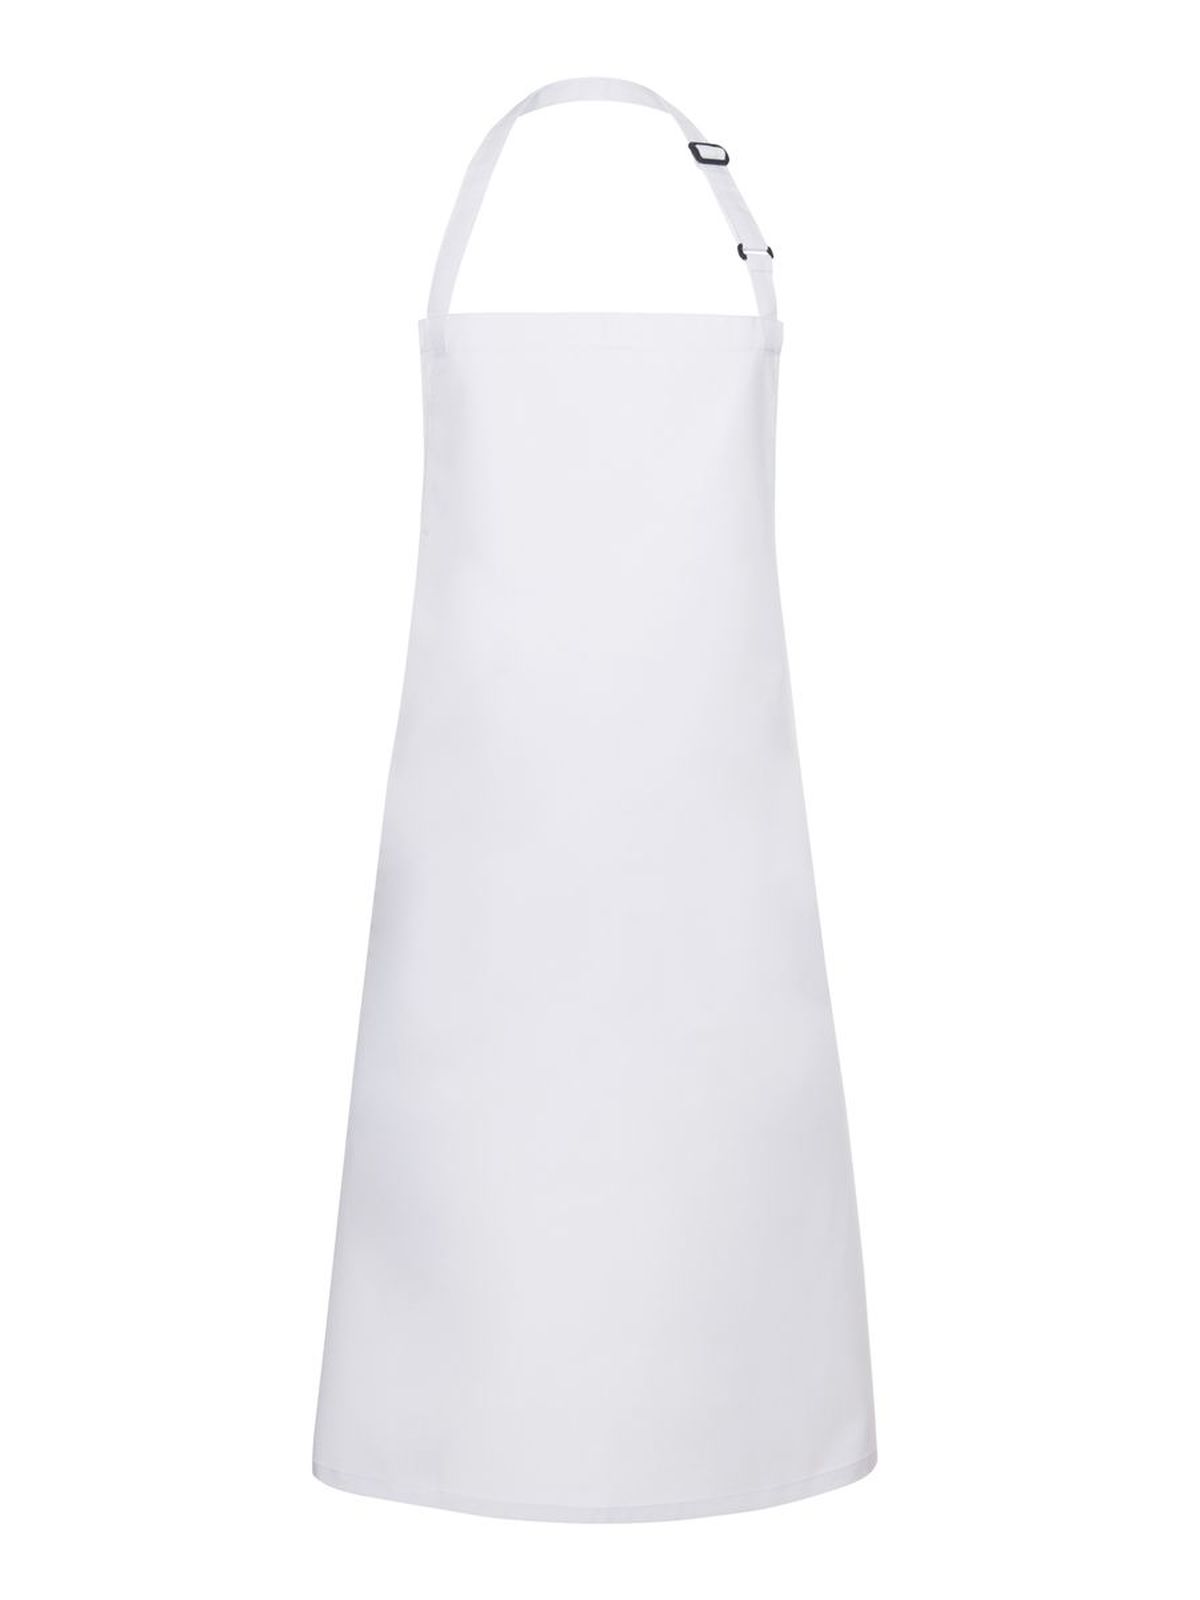 bistro-apron-basic-with-buckle-white.webp